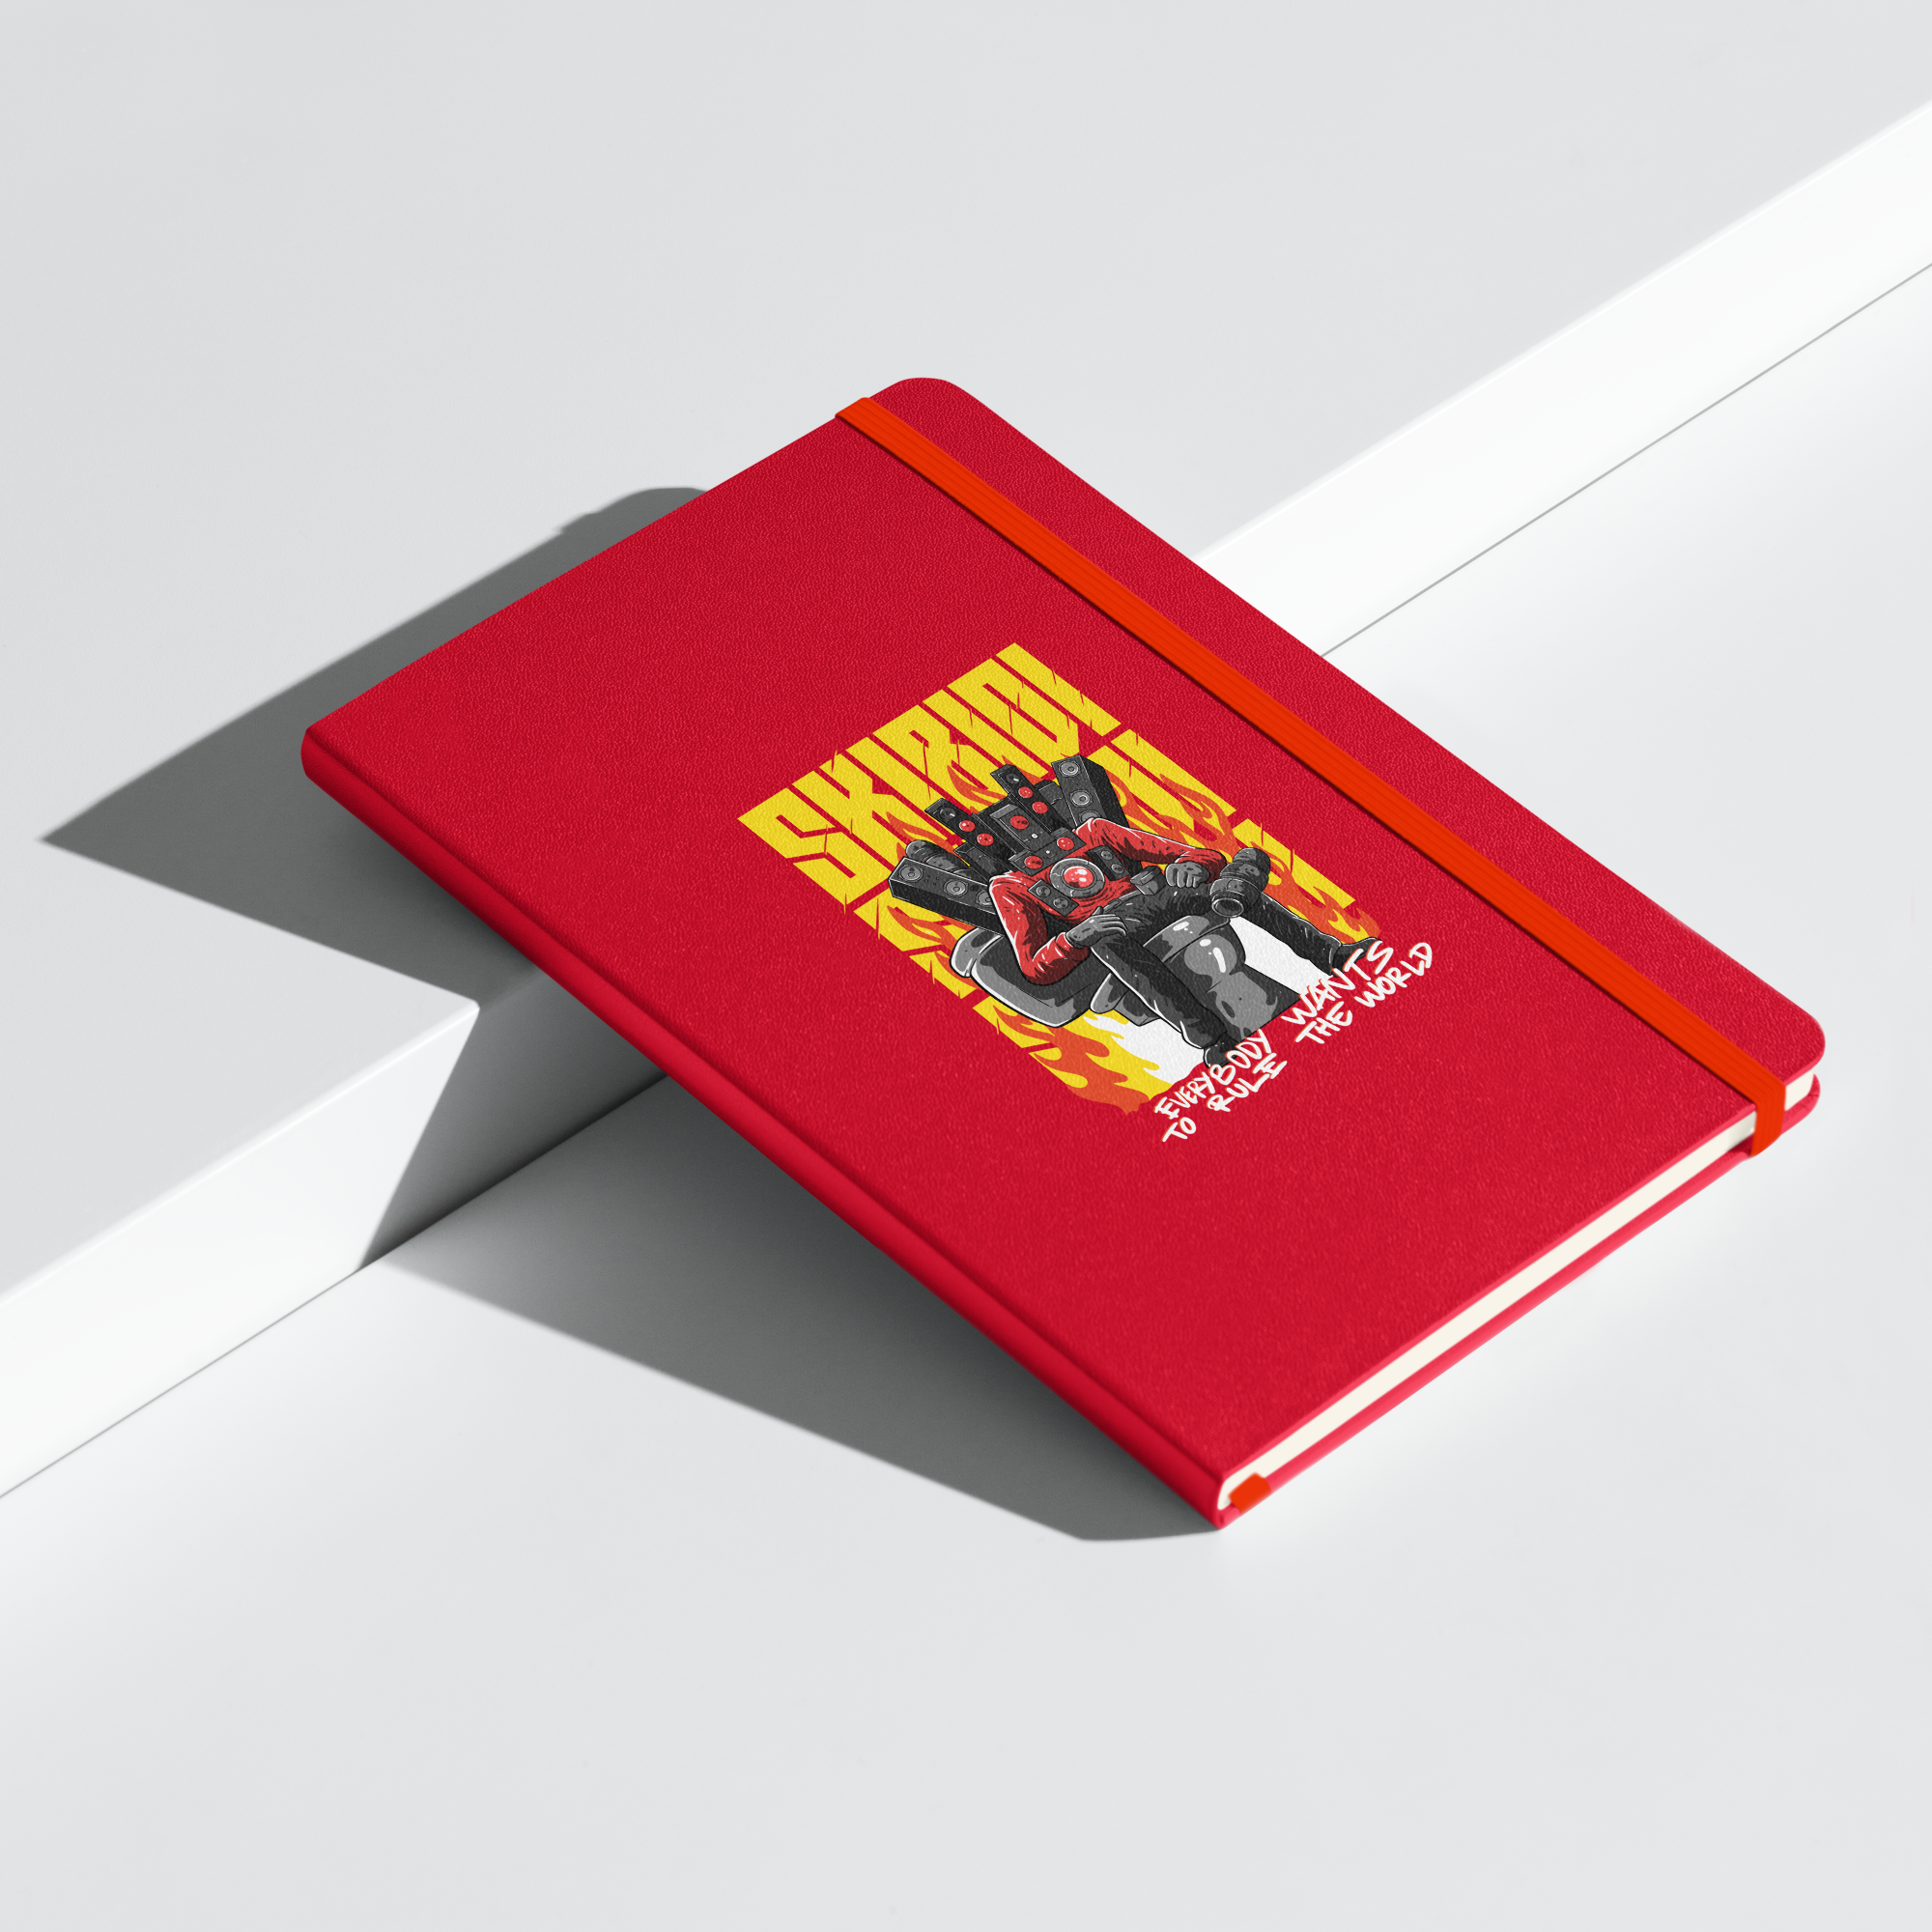 The Titan To Rule The World Notebook Titan Speakerman's fiery victory notebook Red on blank background on Ledge